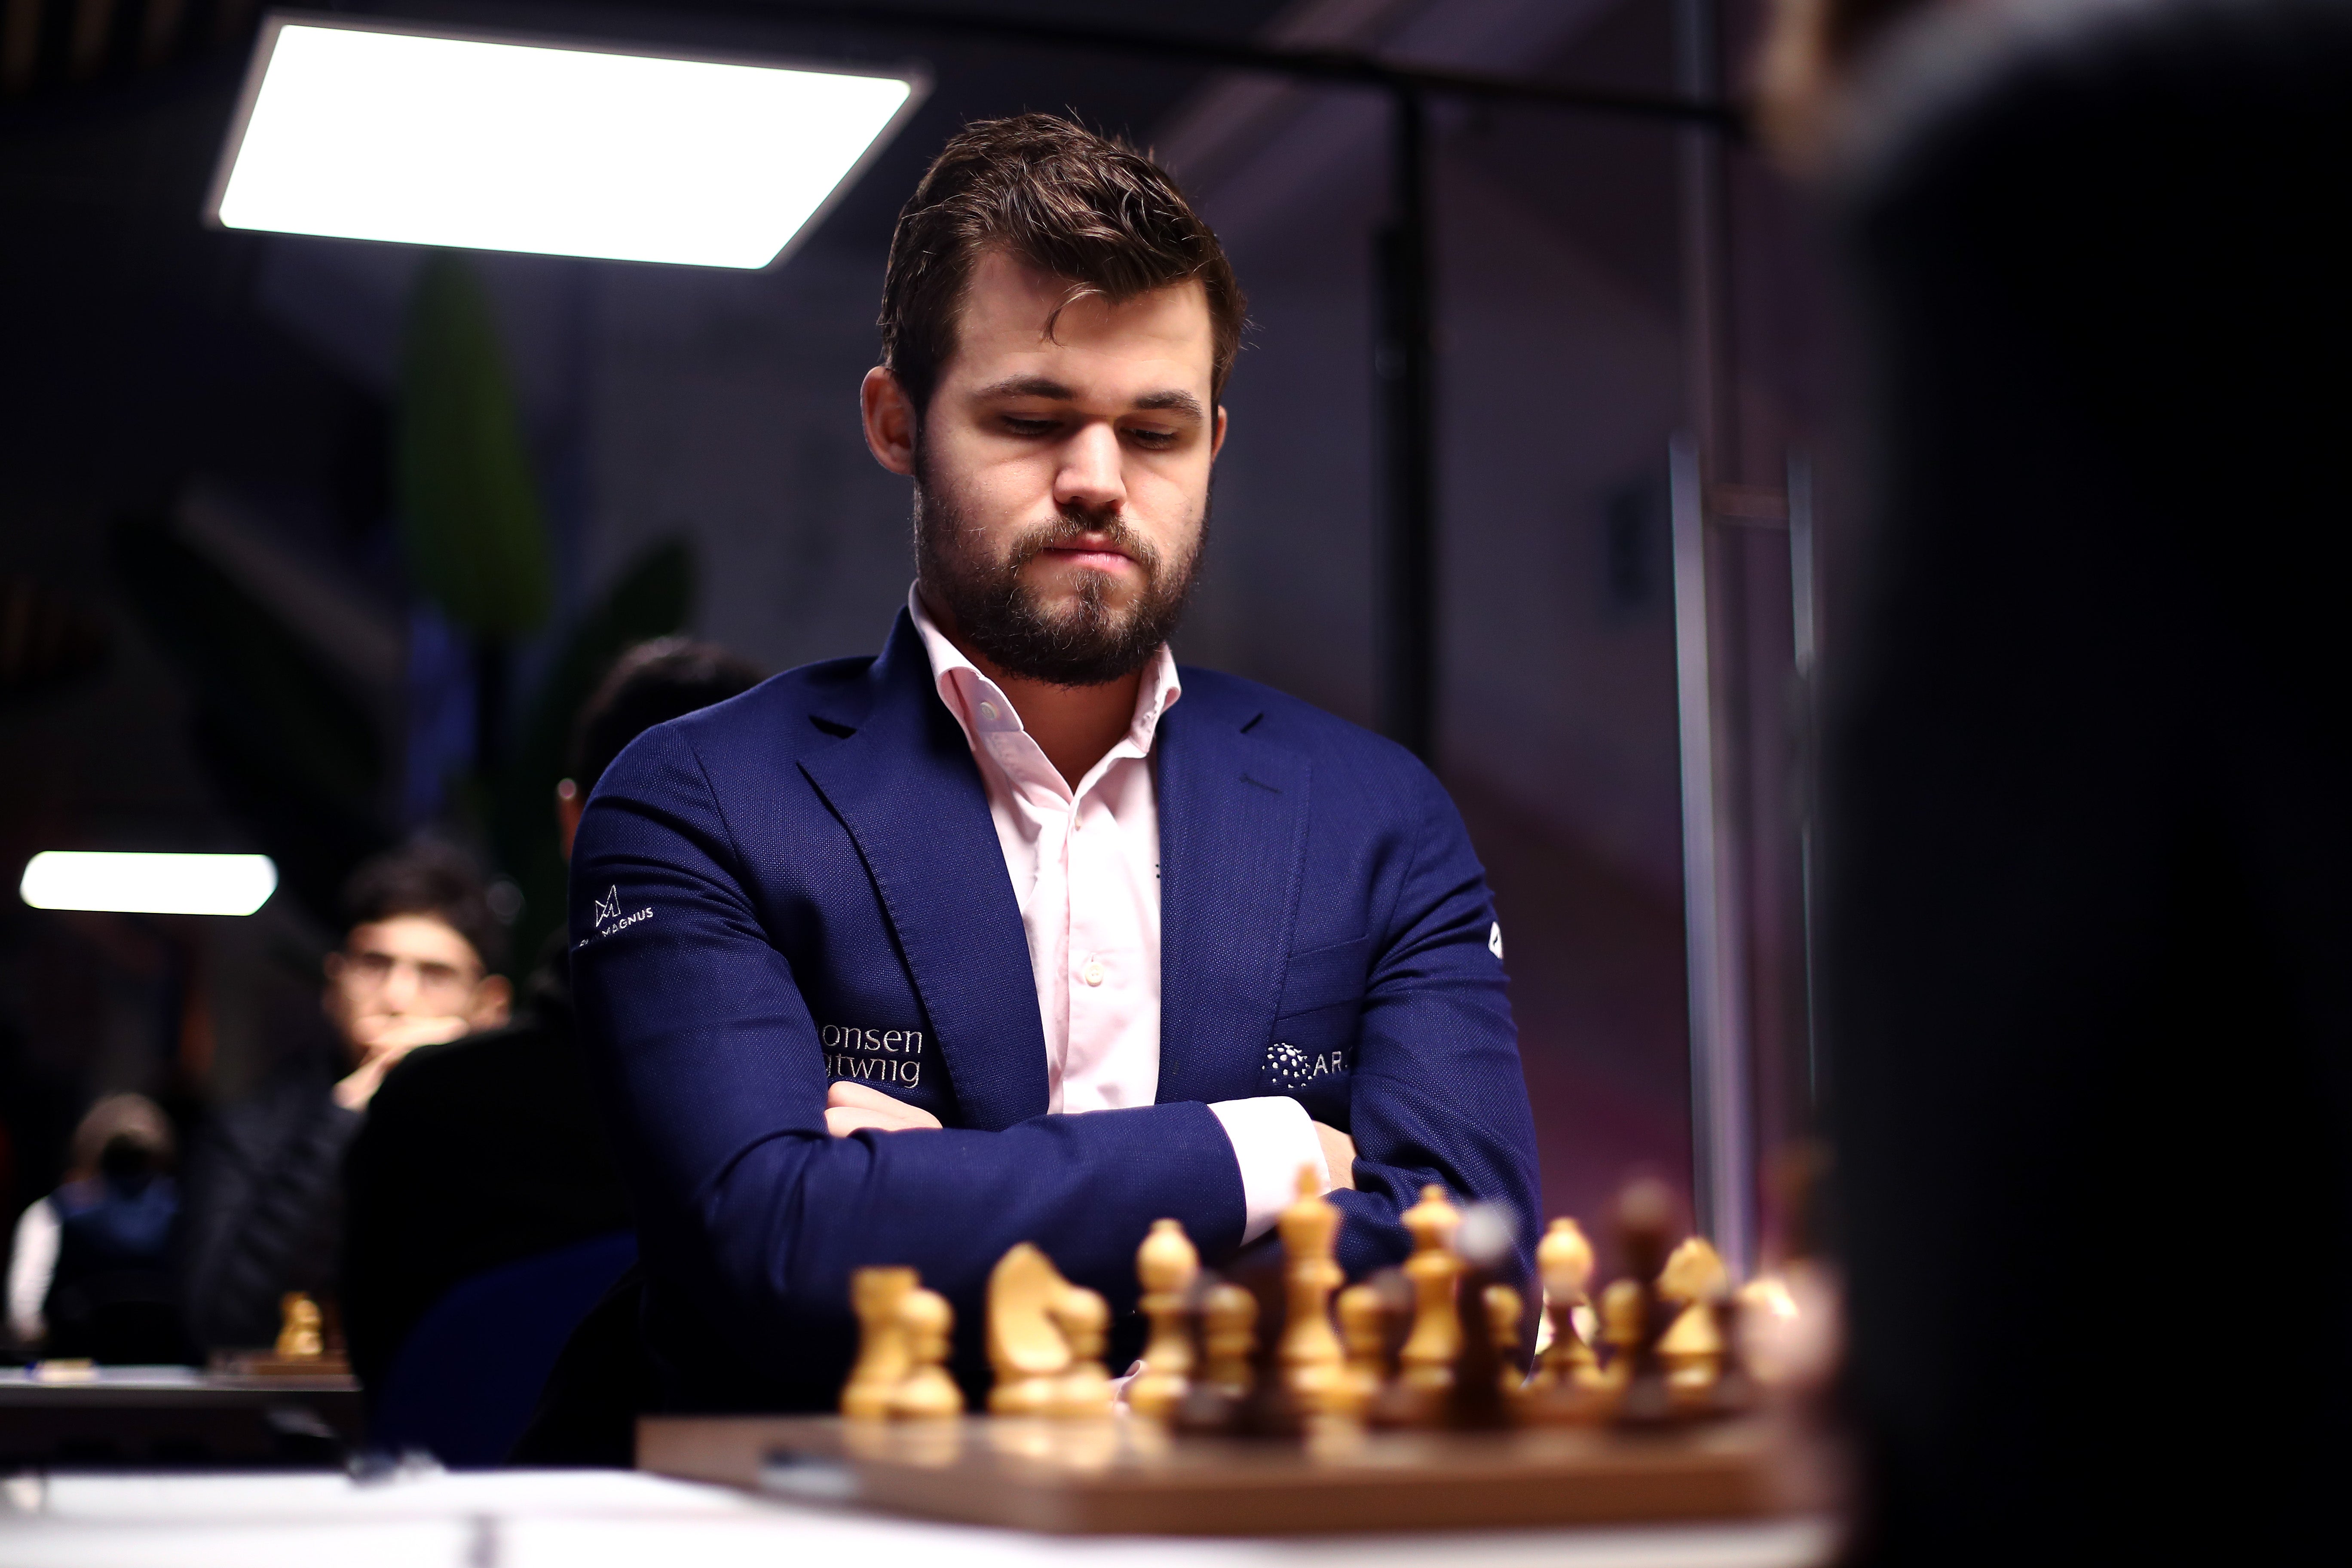 Magnus Carlsen has held the title since 2013